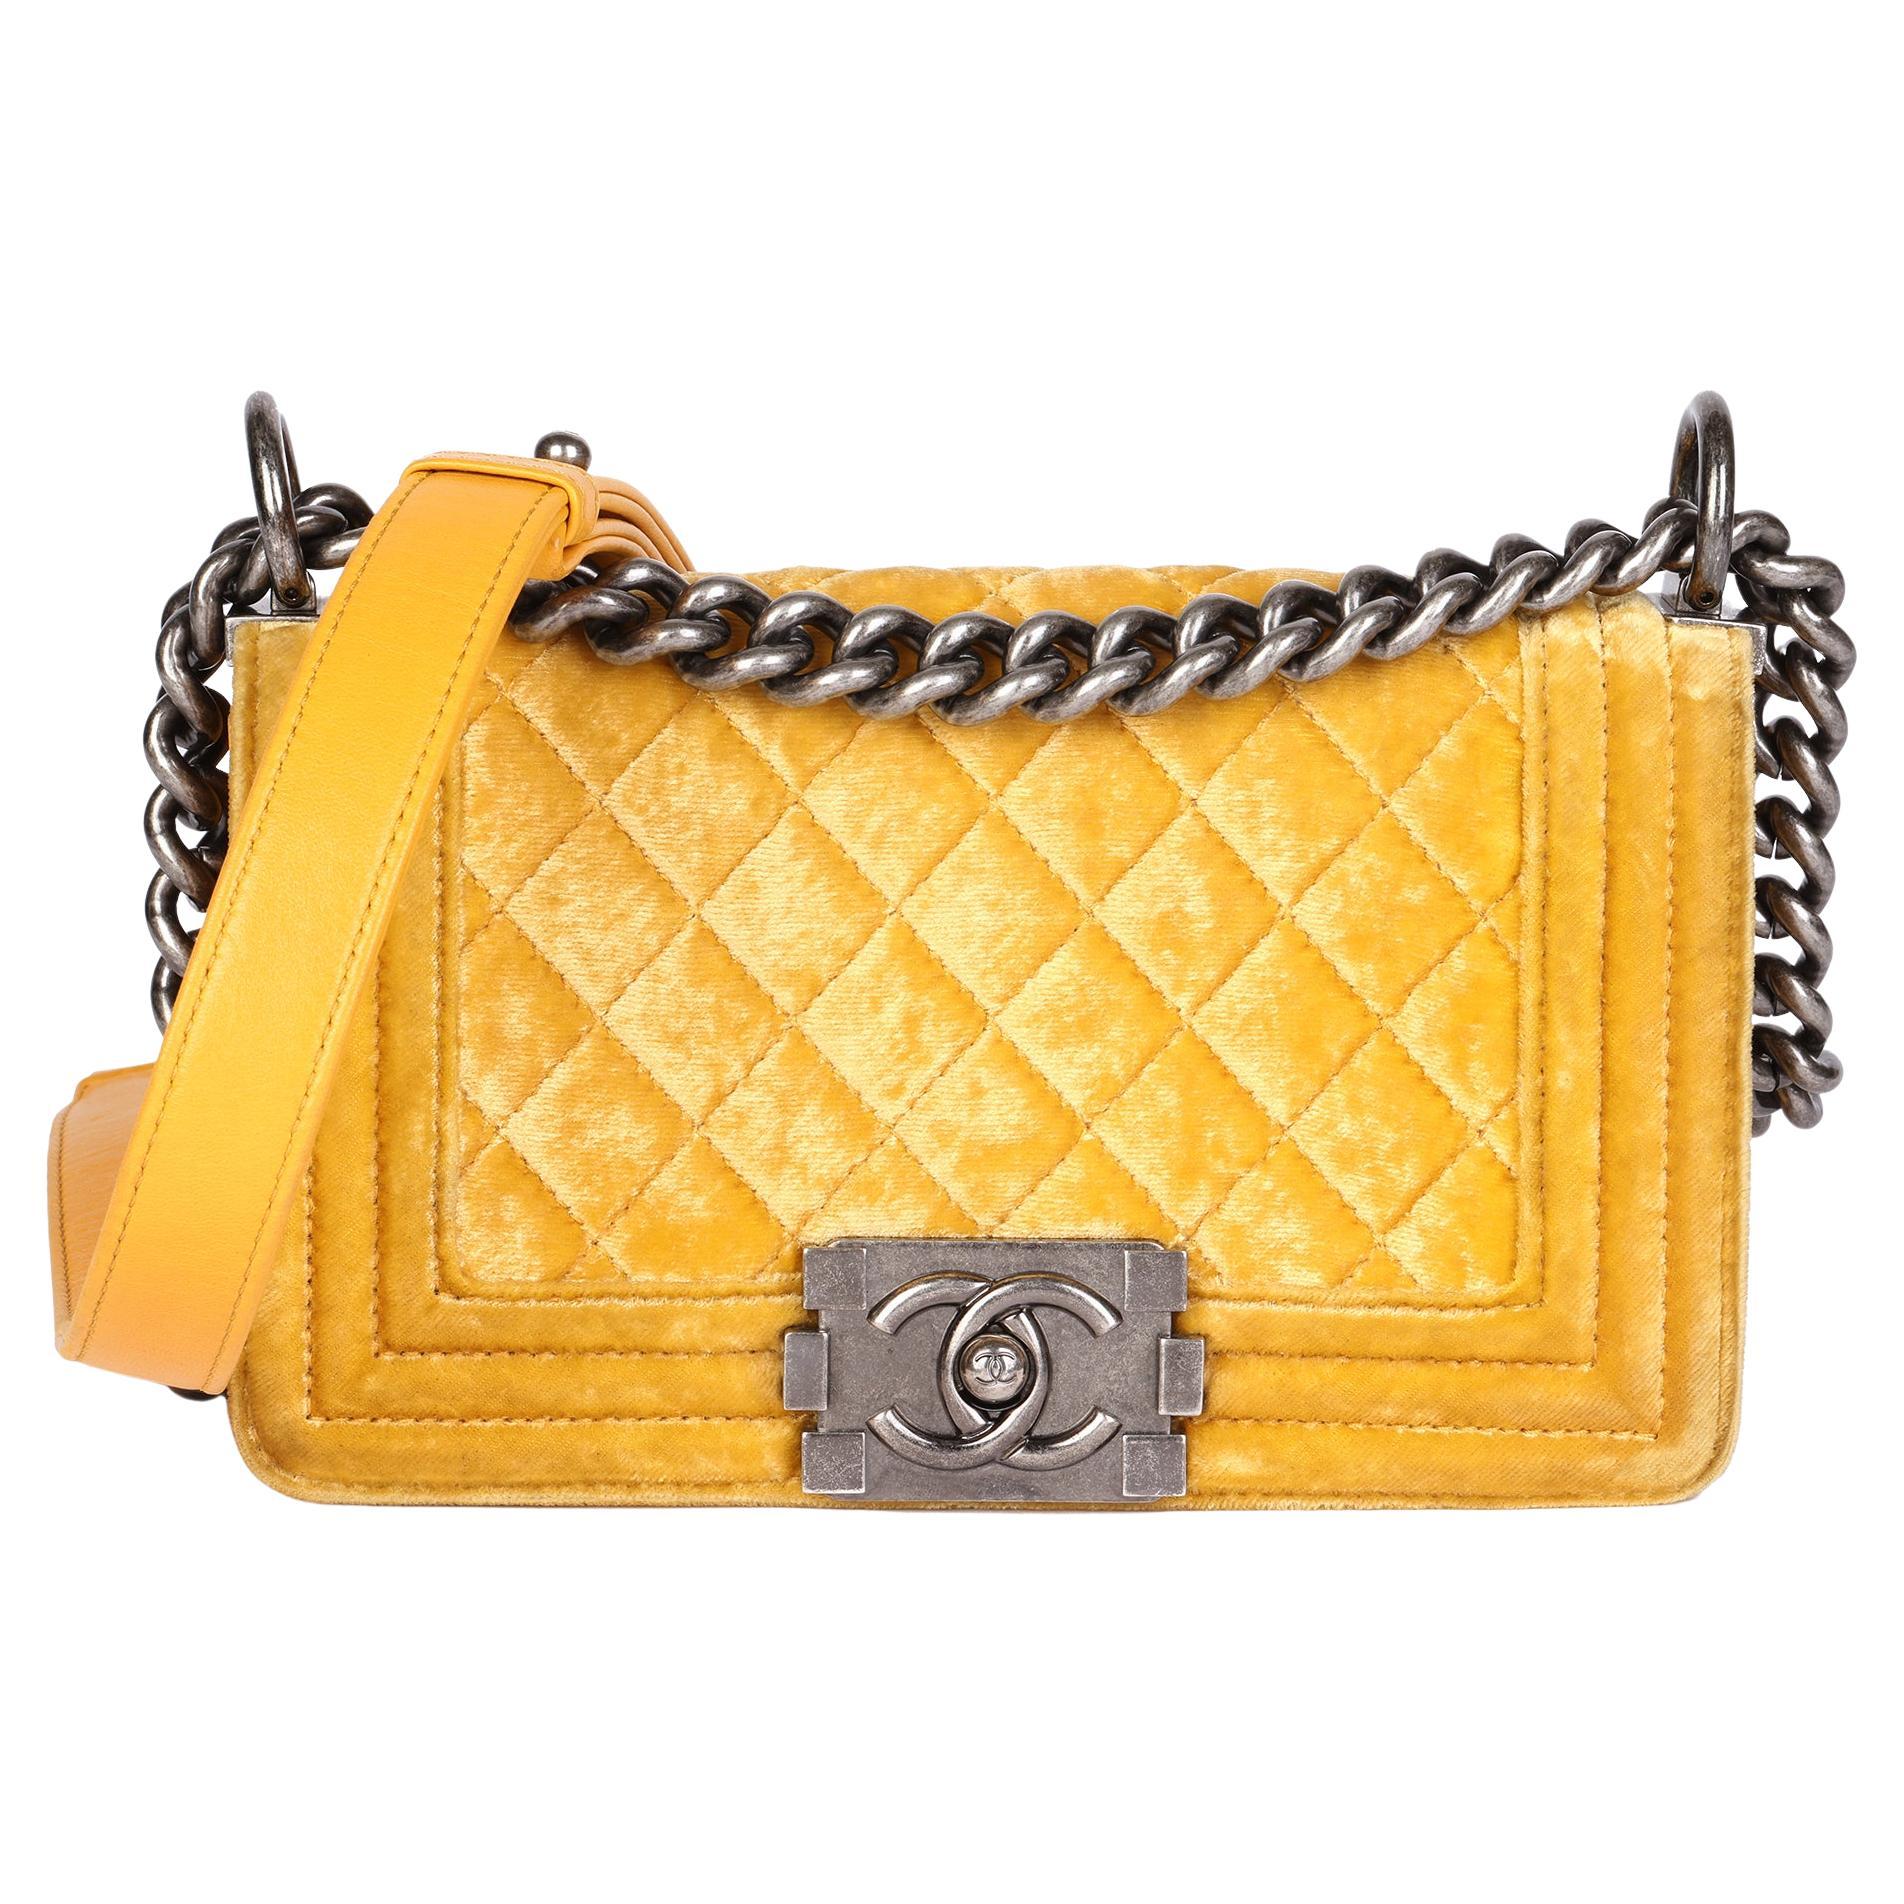 CHANEL Yellow Quilted Velvet Small Le Boy